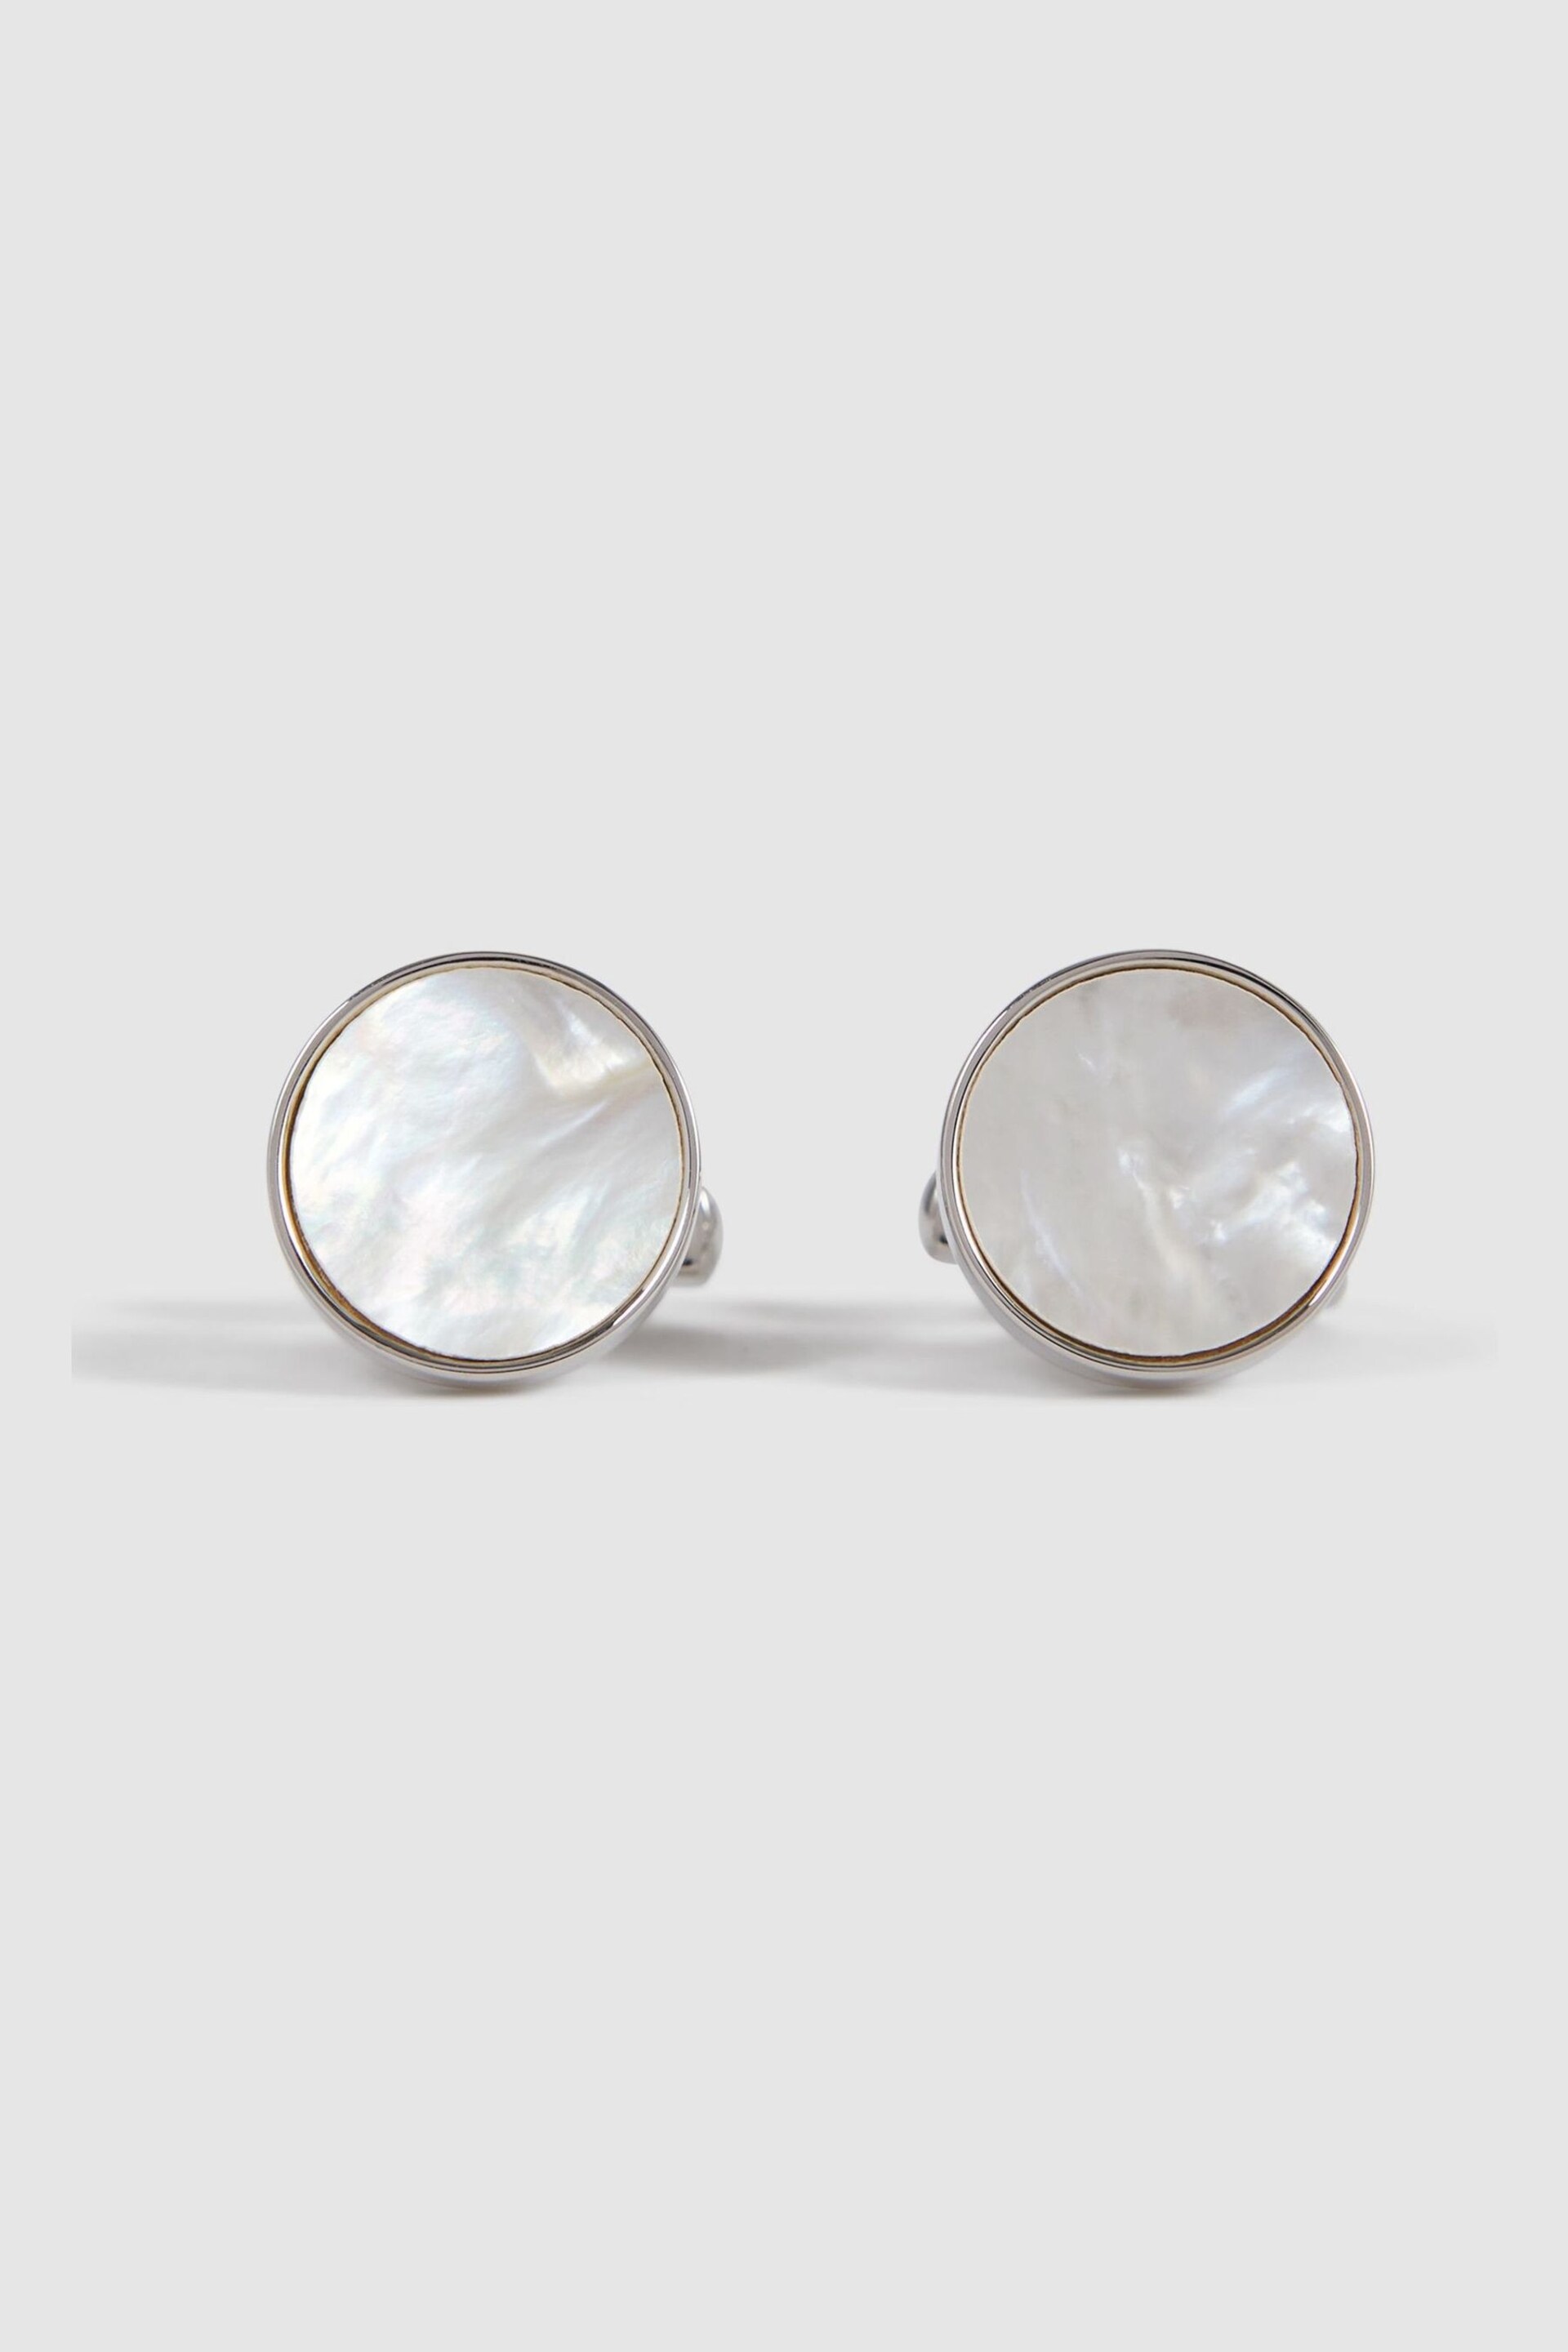 Reiss Silver/MOP Ardley Round Mother of Pearl Cufflinks - Image 1 of 5